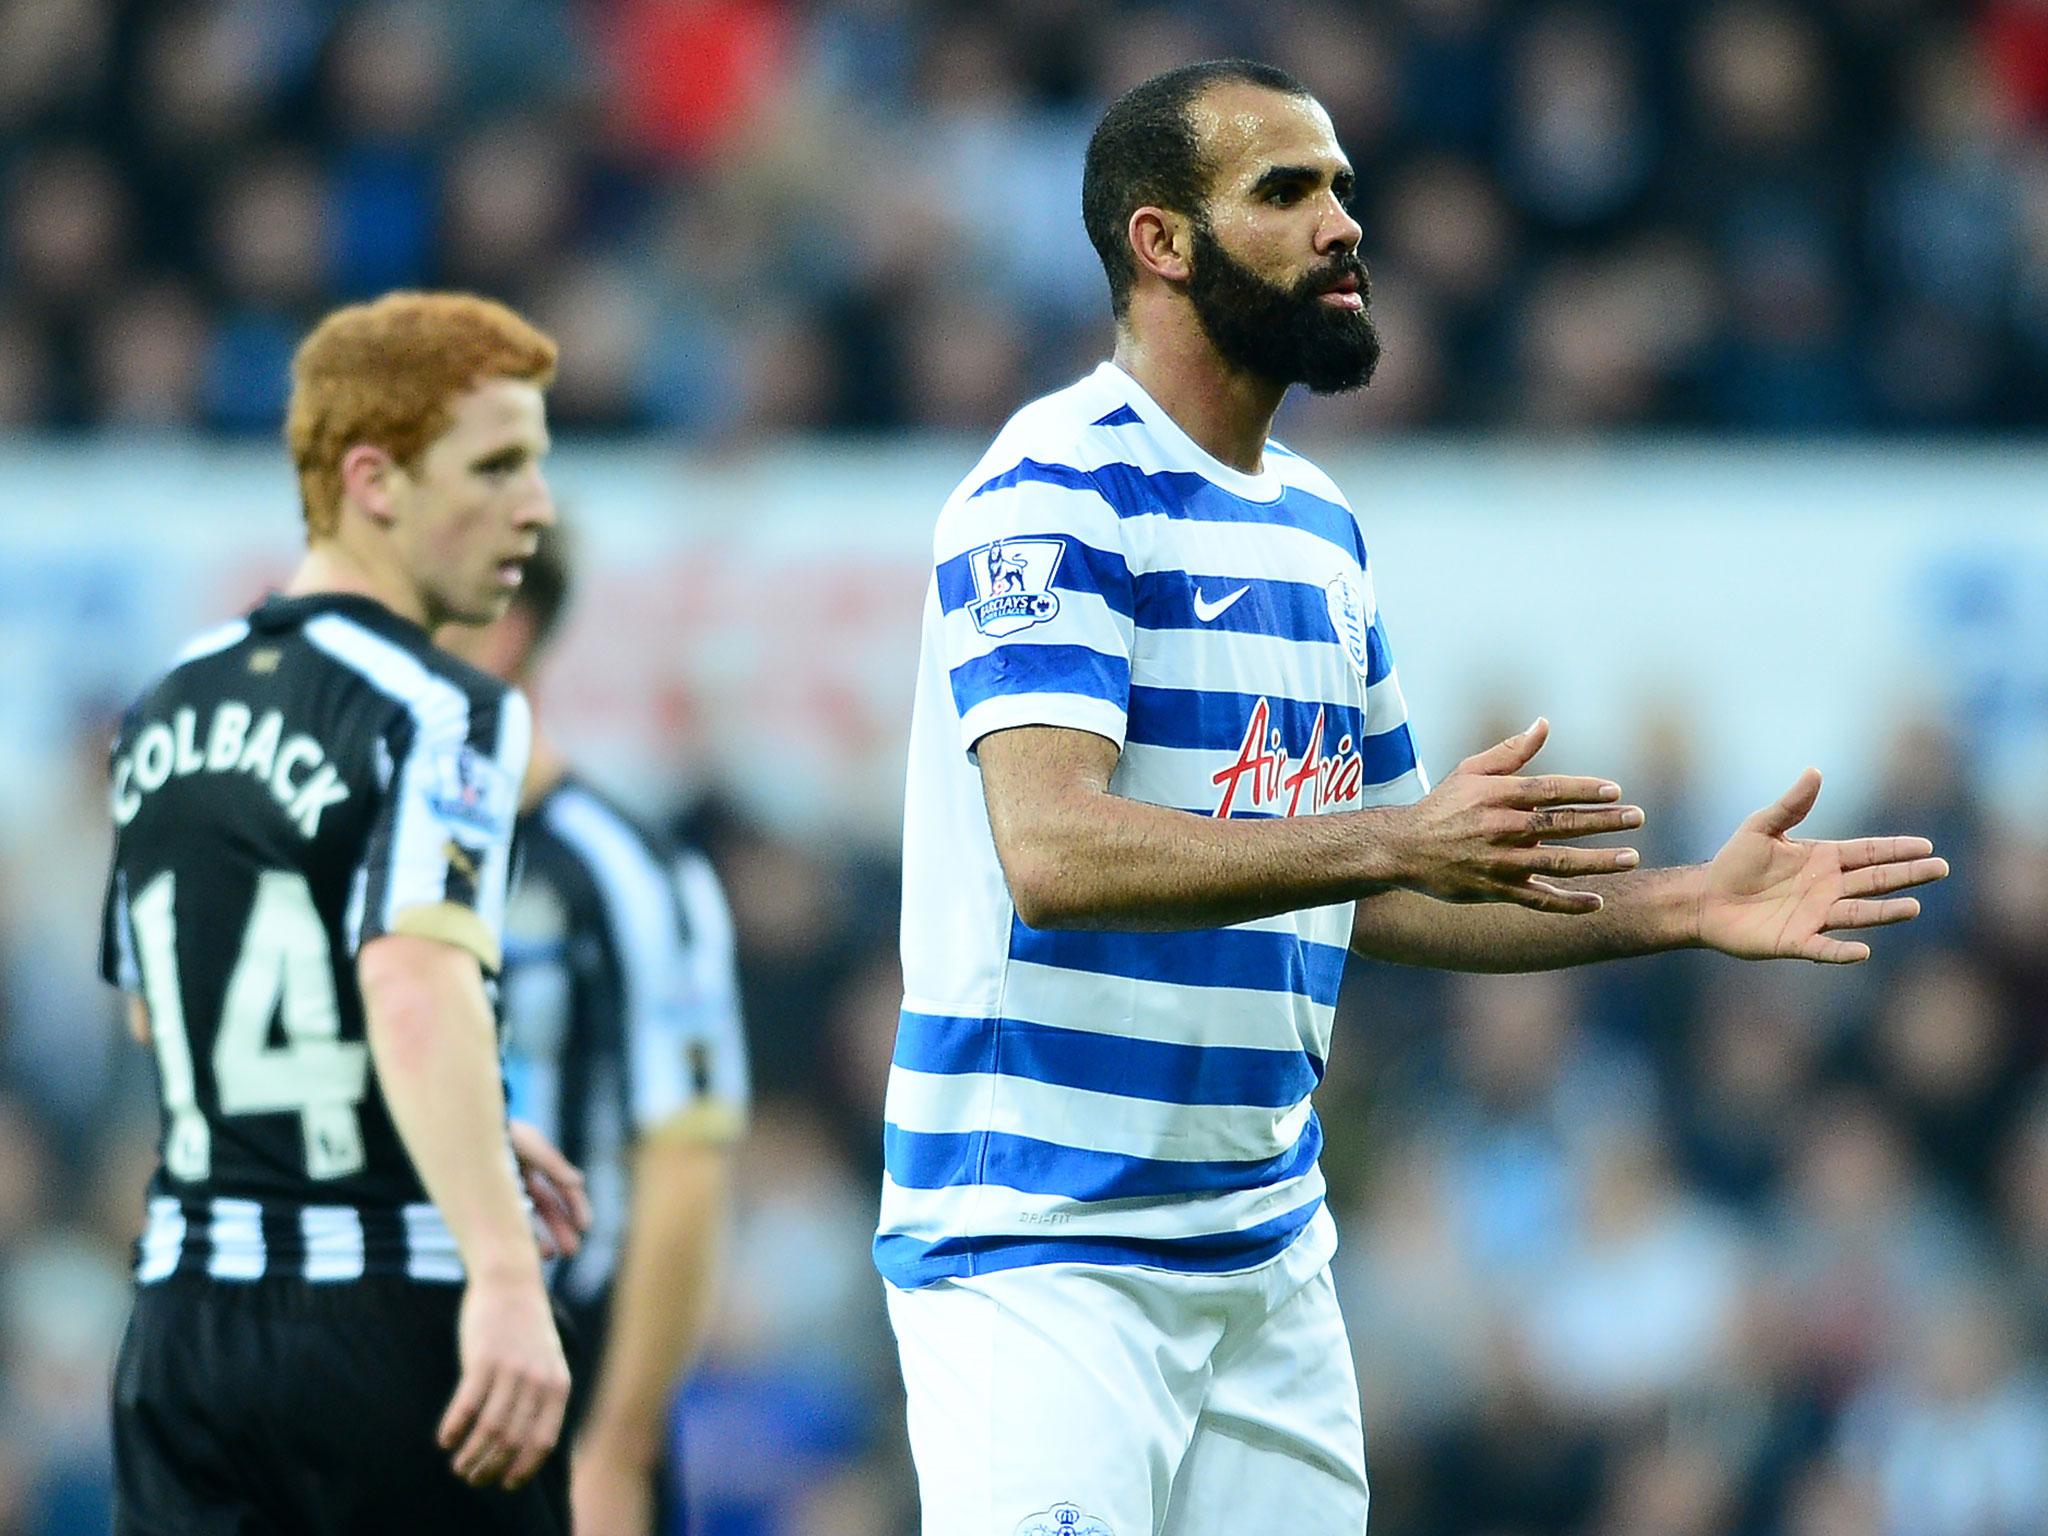 QPR's Sandro has agreed to join Turkish side Antalyaspor having failed to reach his potential in England